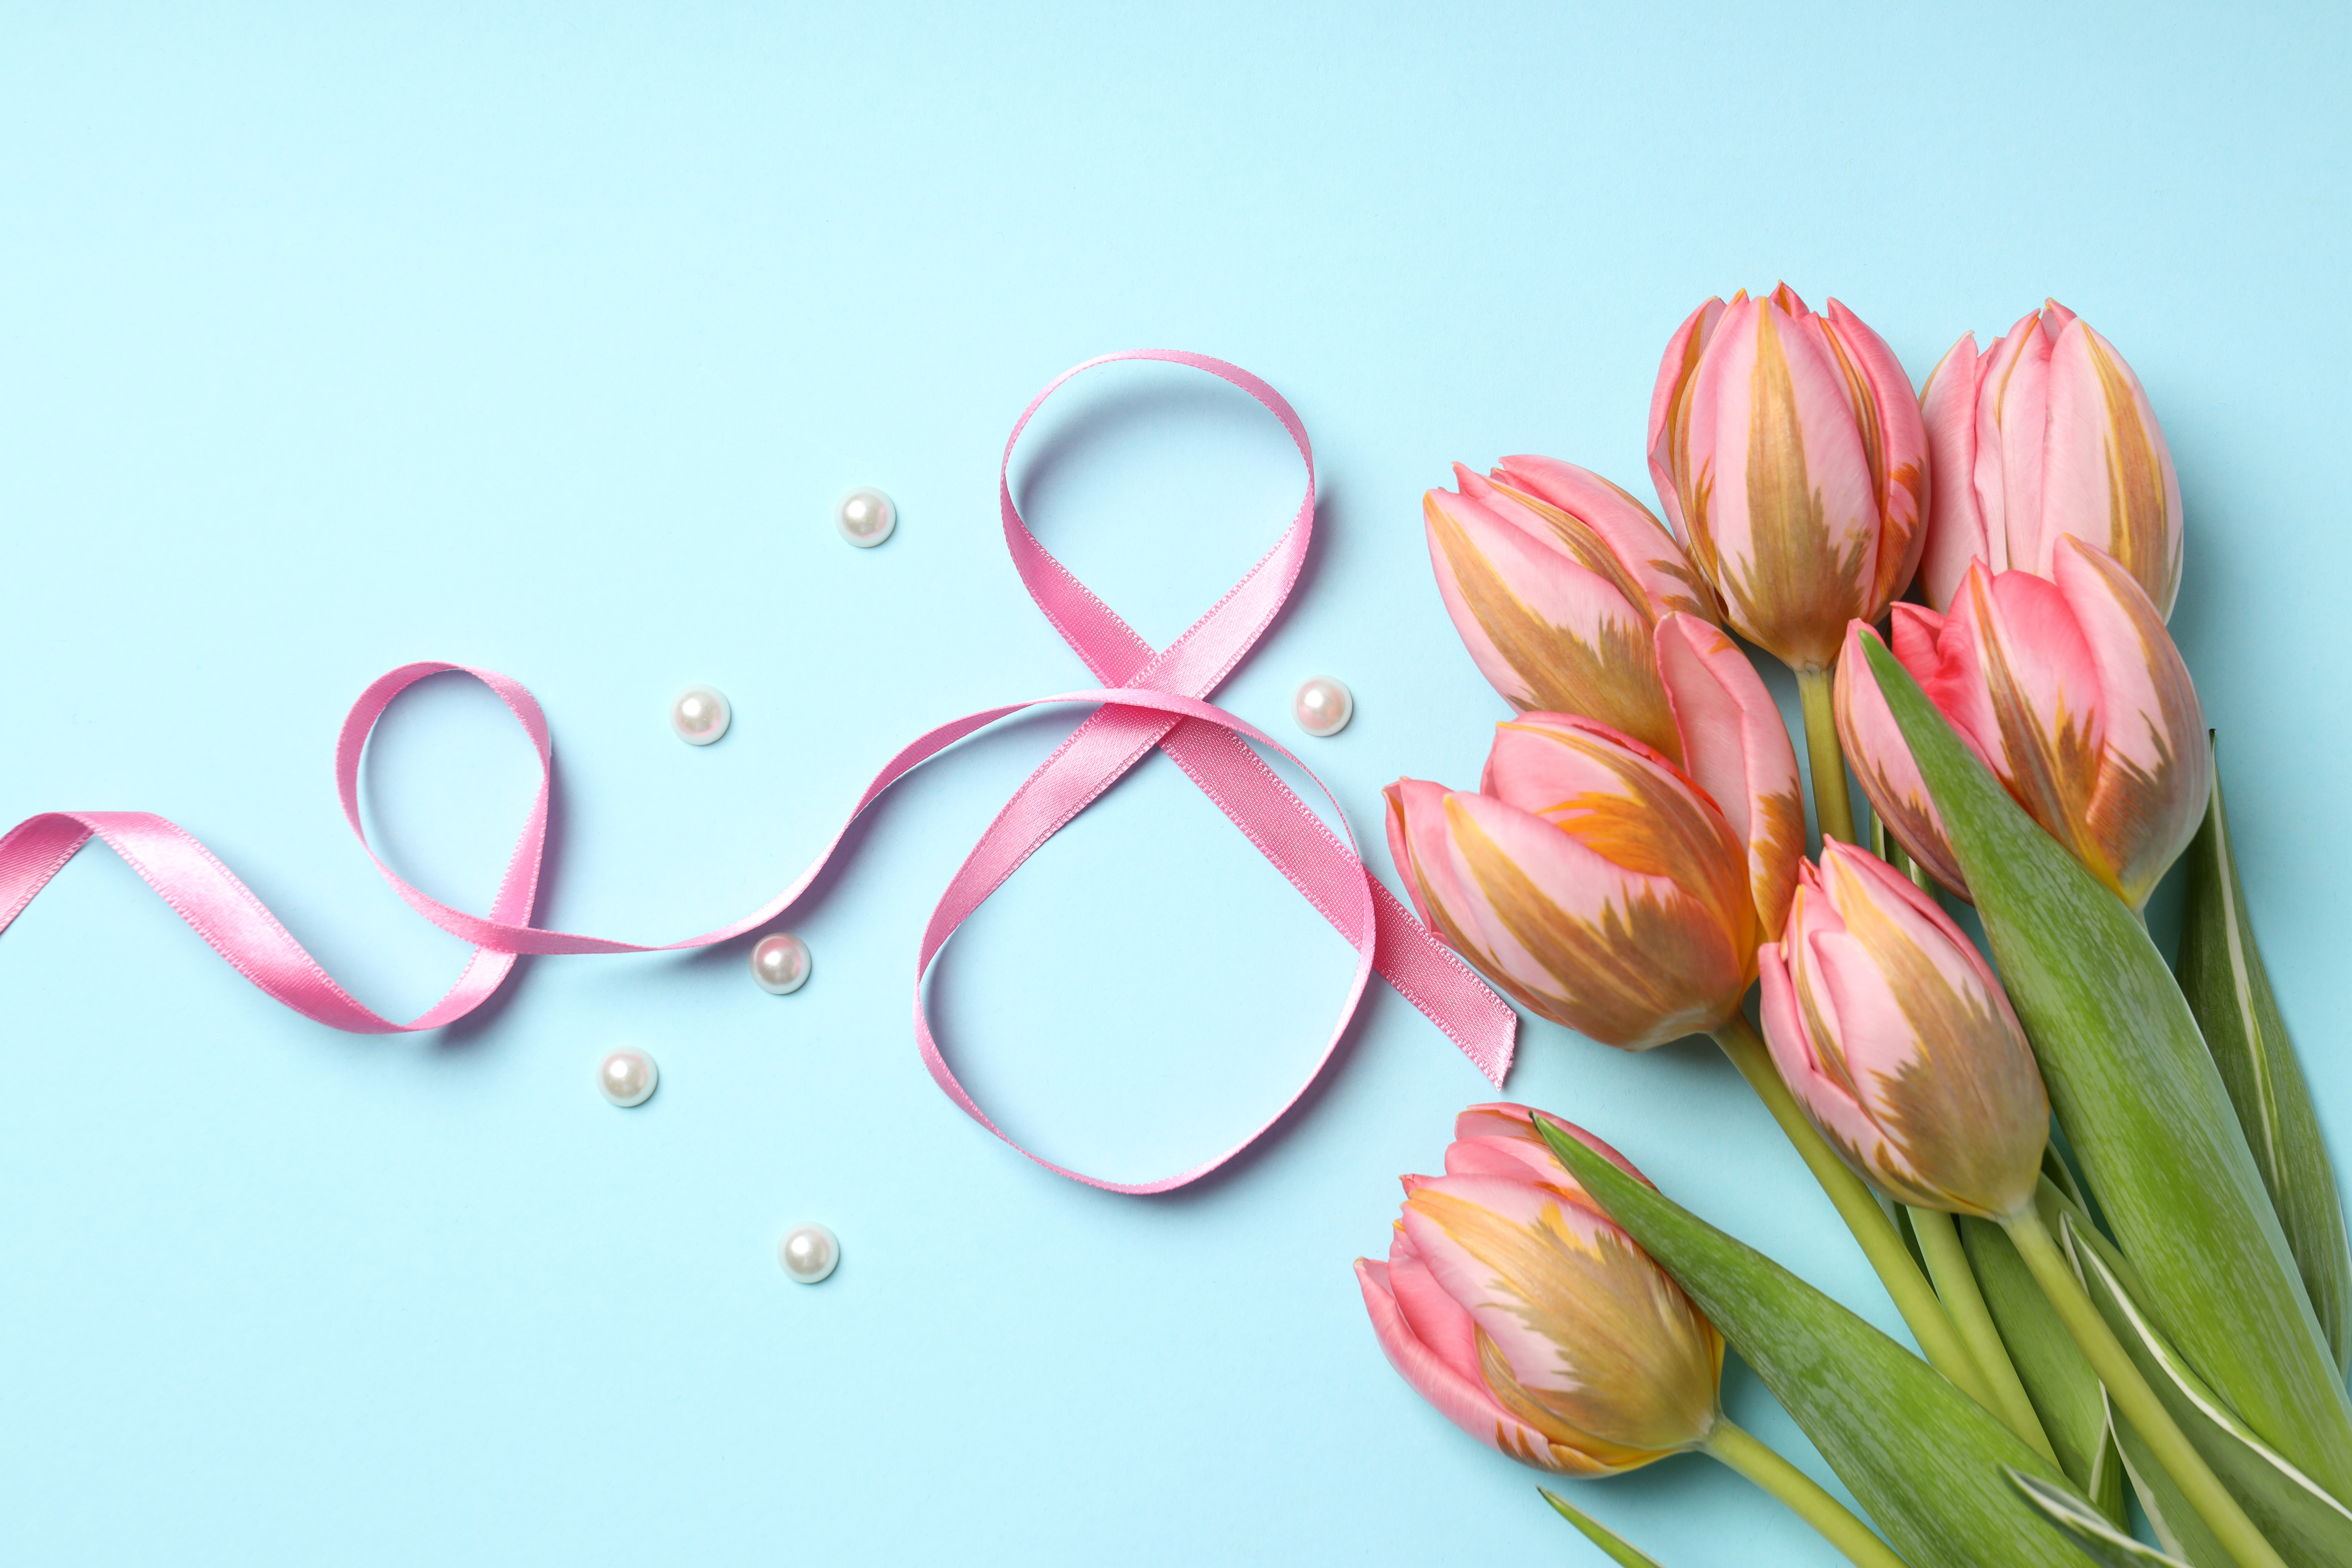 HD wallpaper, Ribbon, 5K, March 8Th, Pearls, Blue Background, Tulips